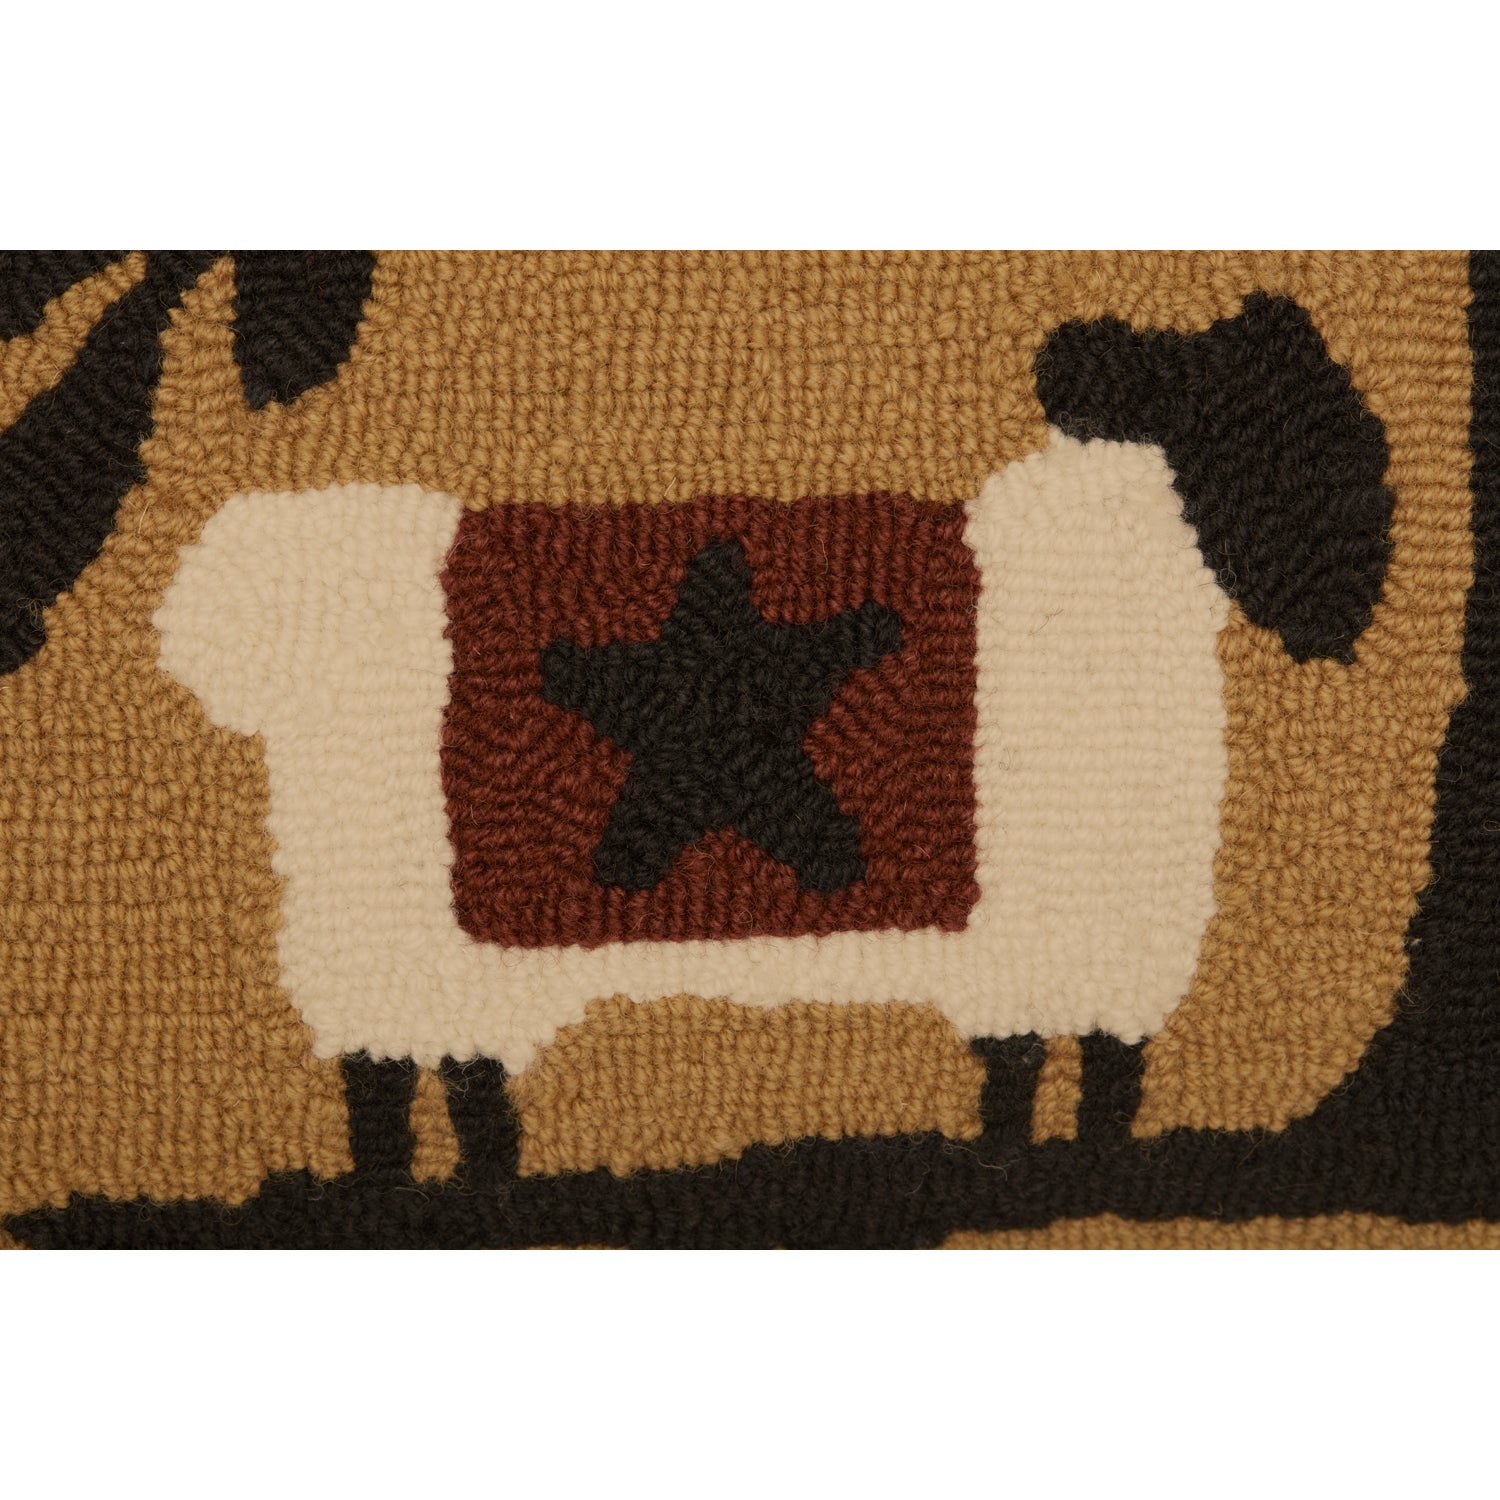 56697-Heritage-Farms-Sheep-and-Star-Hooked-Pillow-14x22-image-6